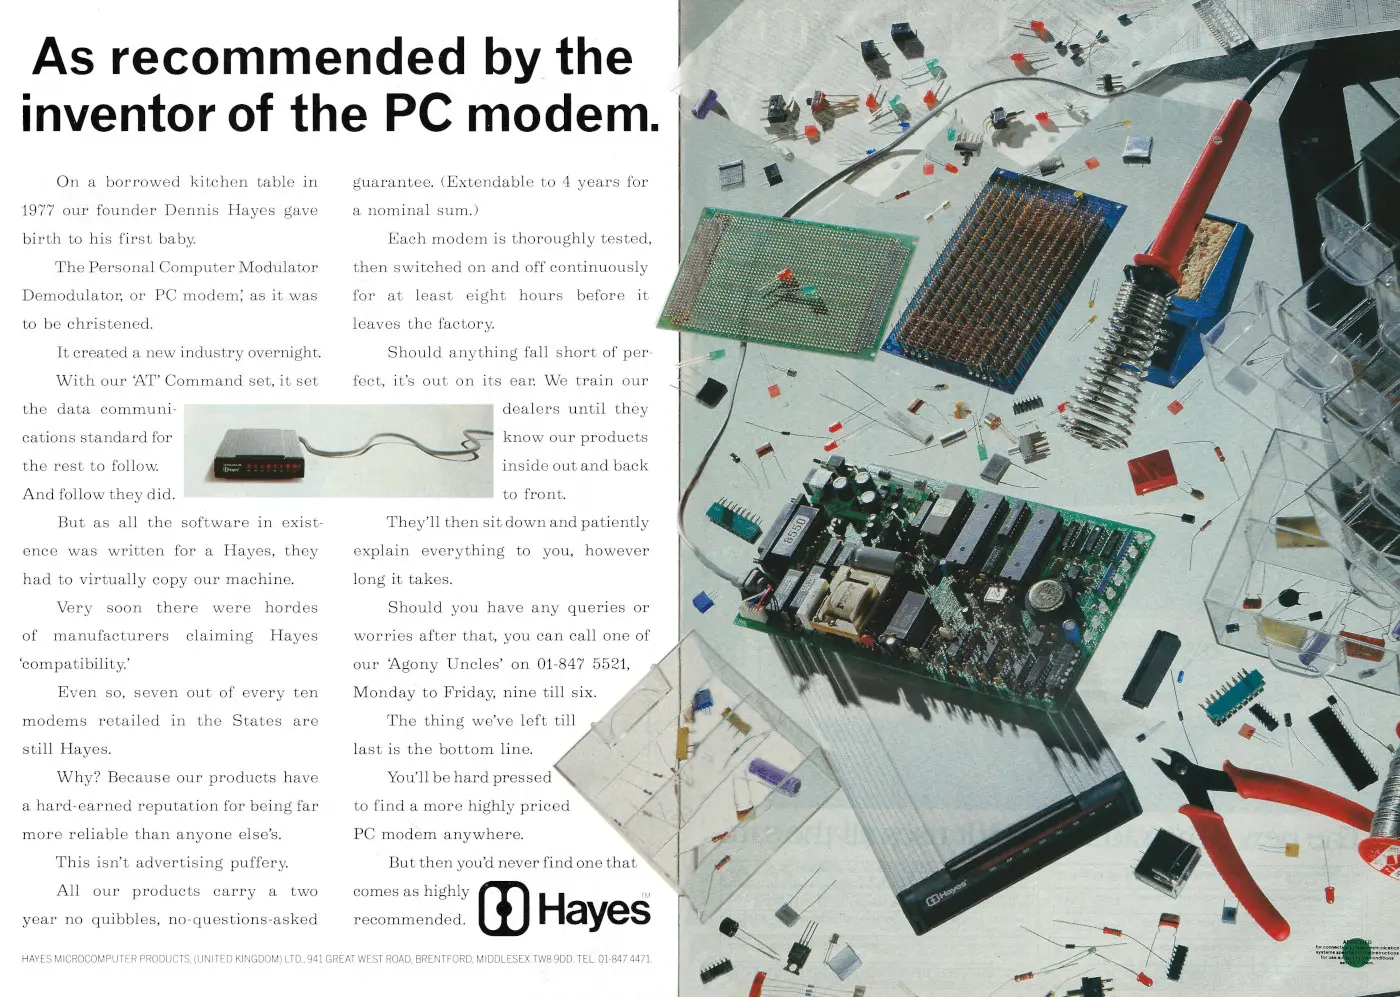 Hayes Advert: As recommended by the inventor of the PC modem, from Practical Computing, February 1987